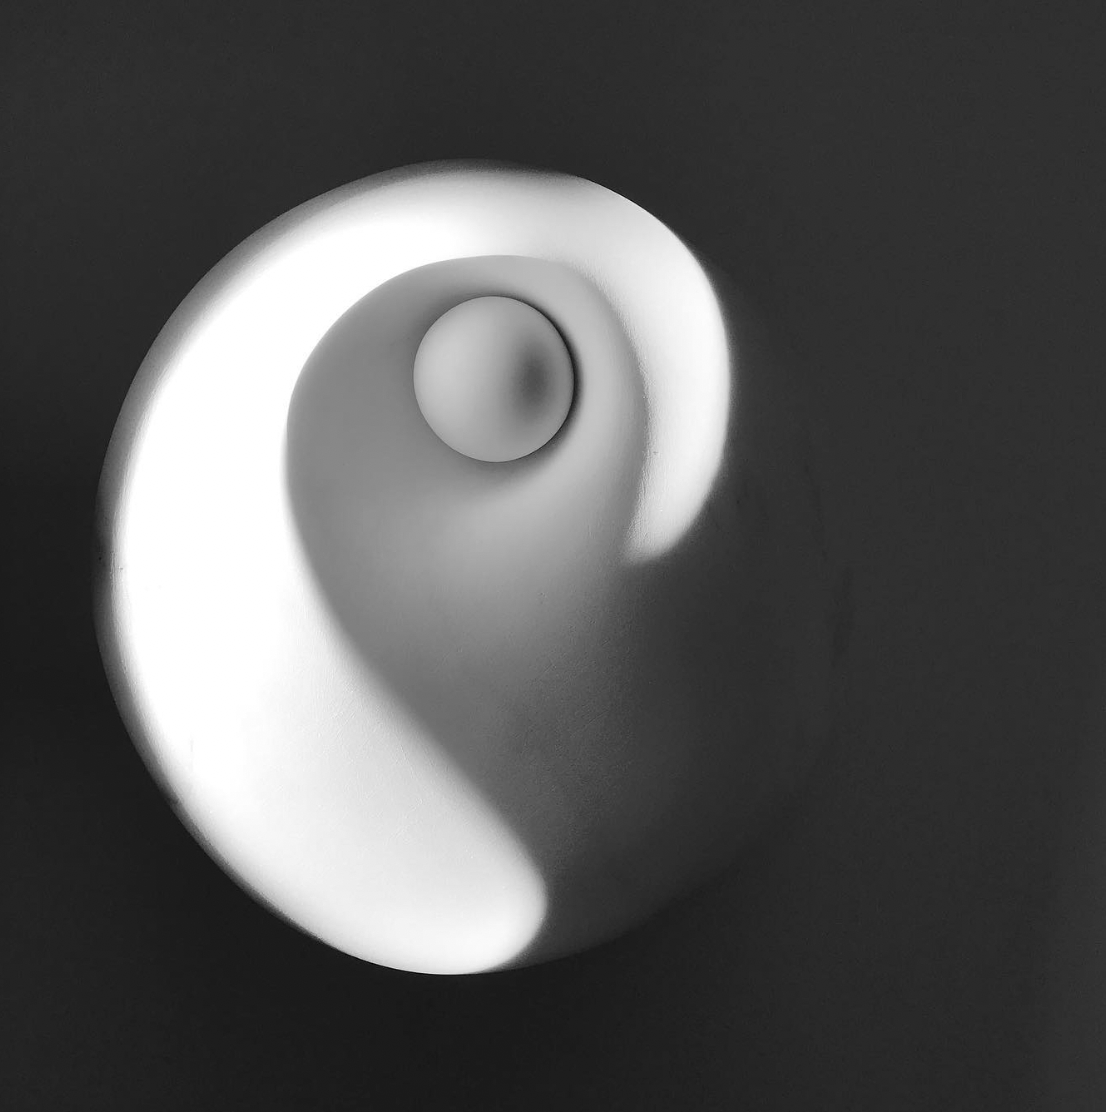 Black and white image of a small ceramic ball and vase sculpture